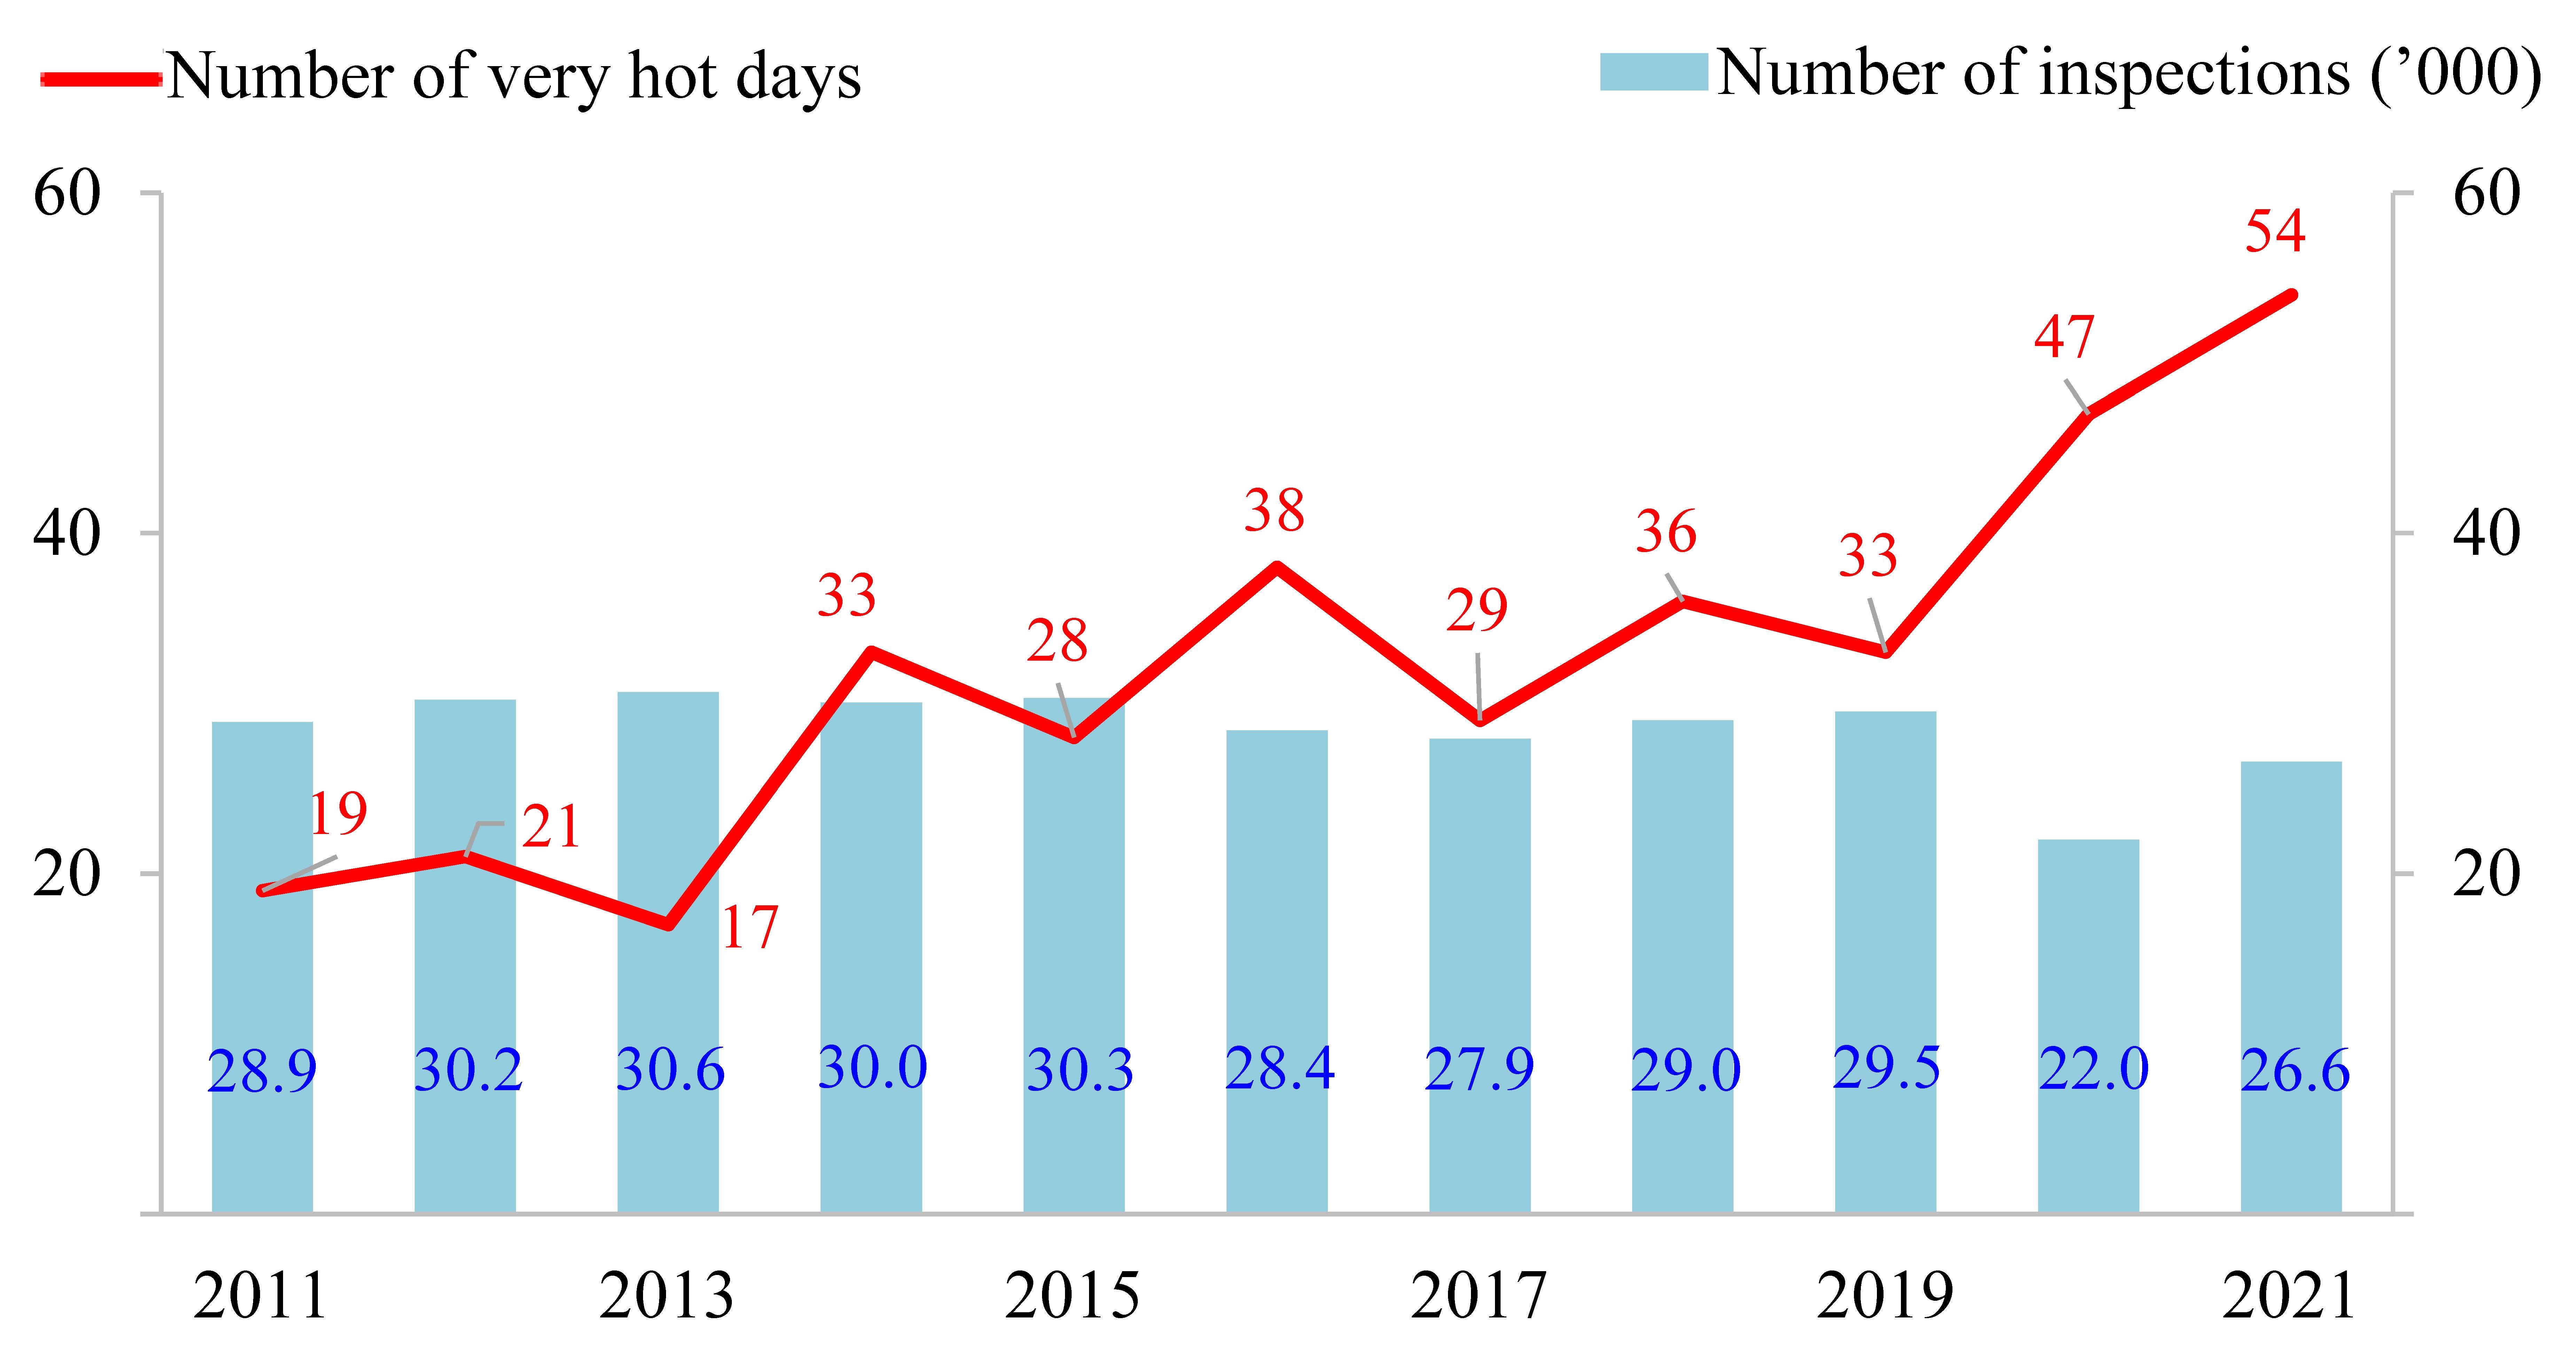 Figure 2 – Number of very hot days and heat-related workplace inspections